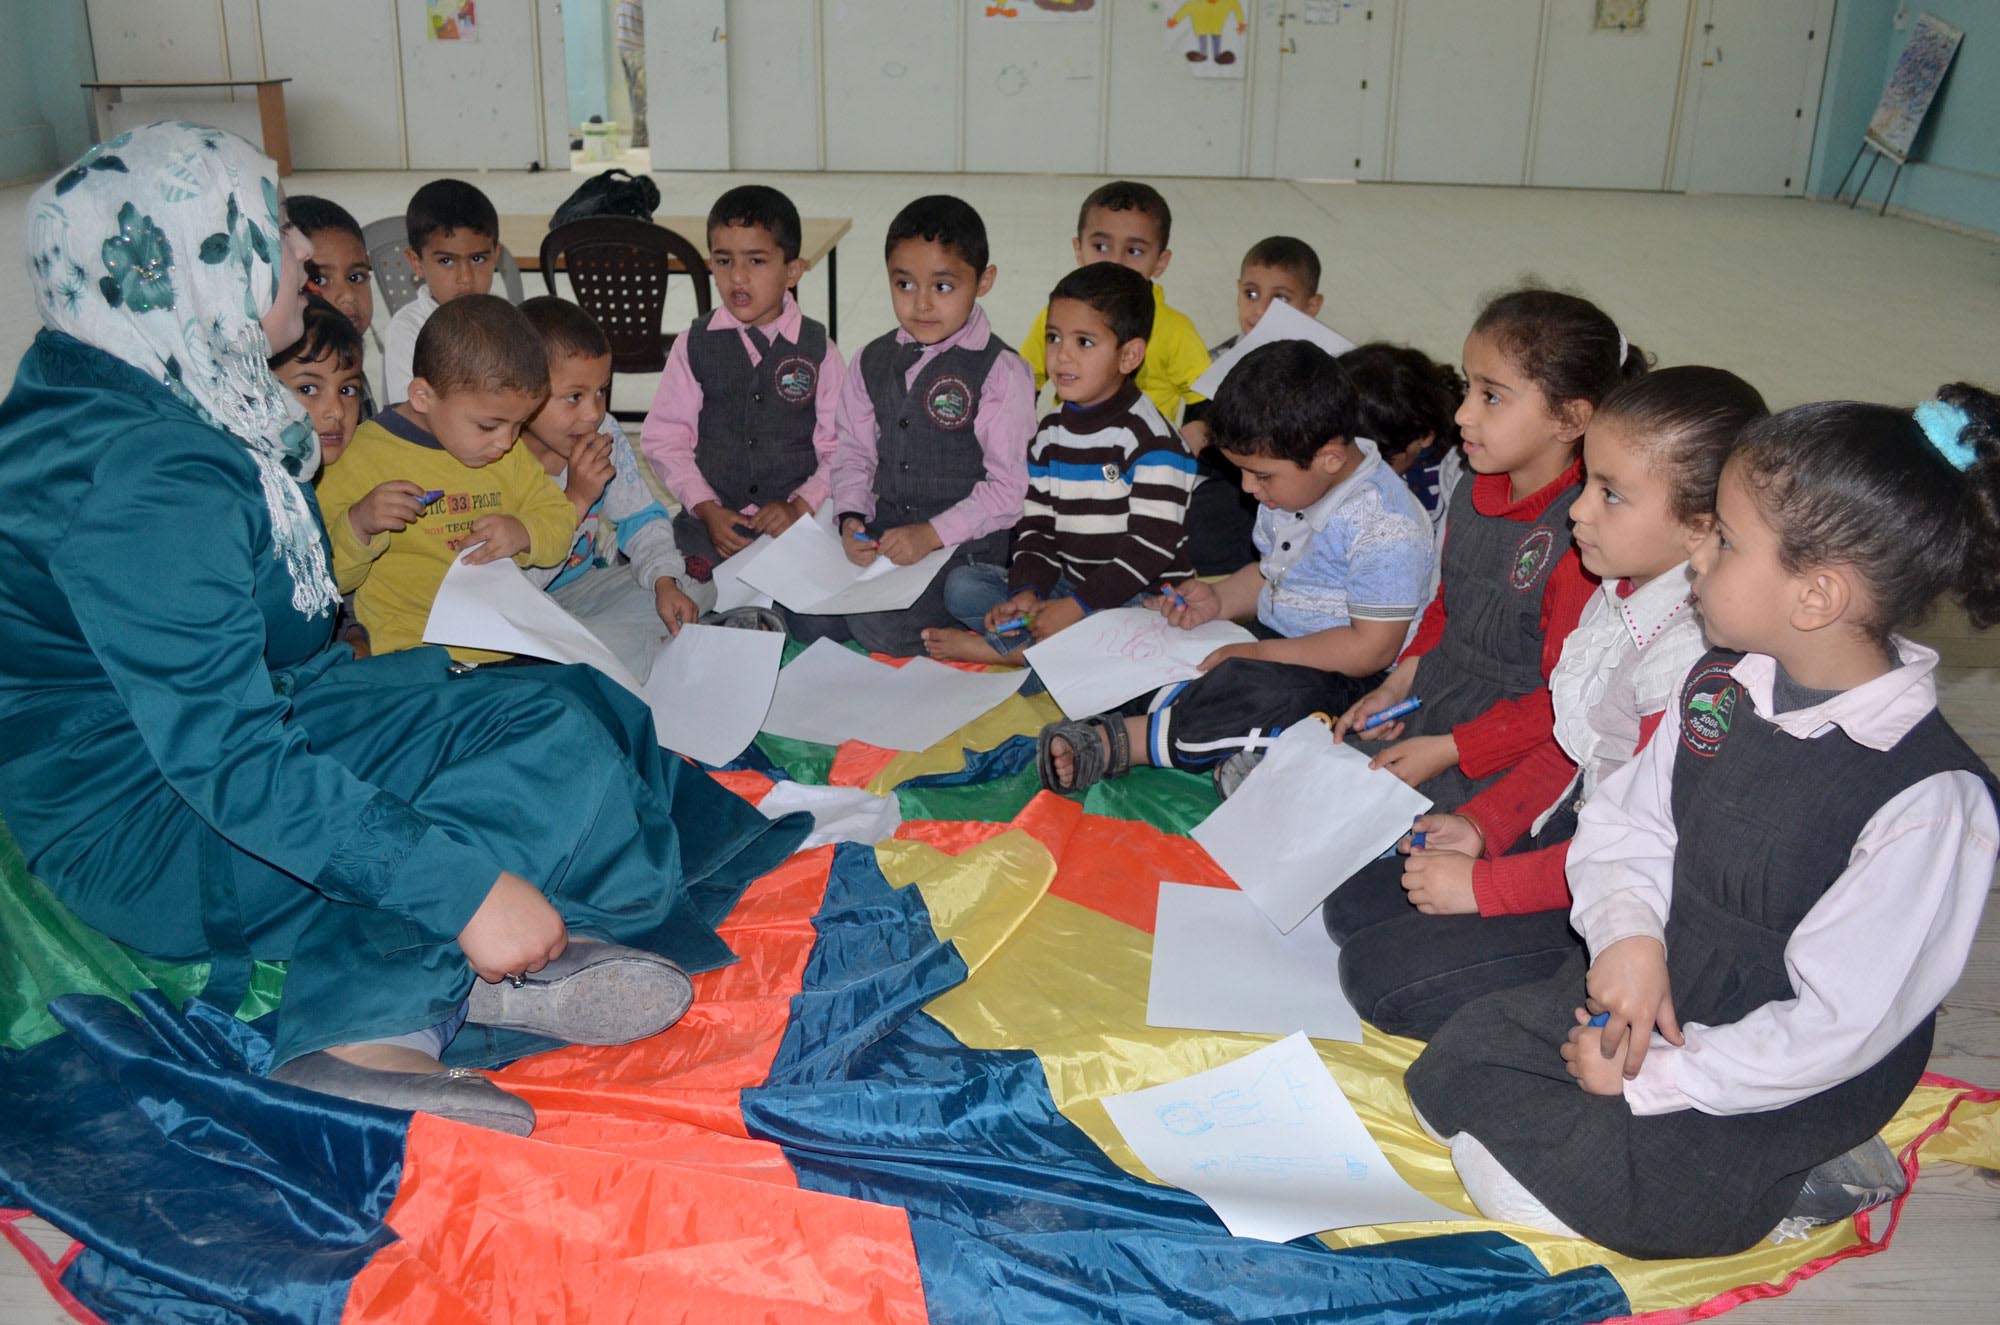 Gaza preschool teacher learned to use a colorful parachute to liven up a reading session.